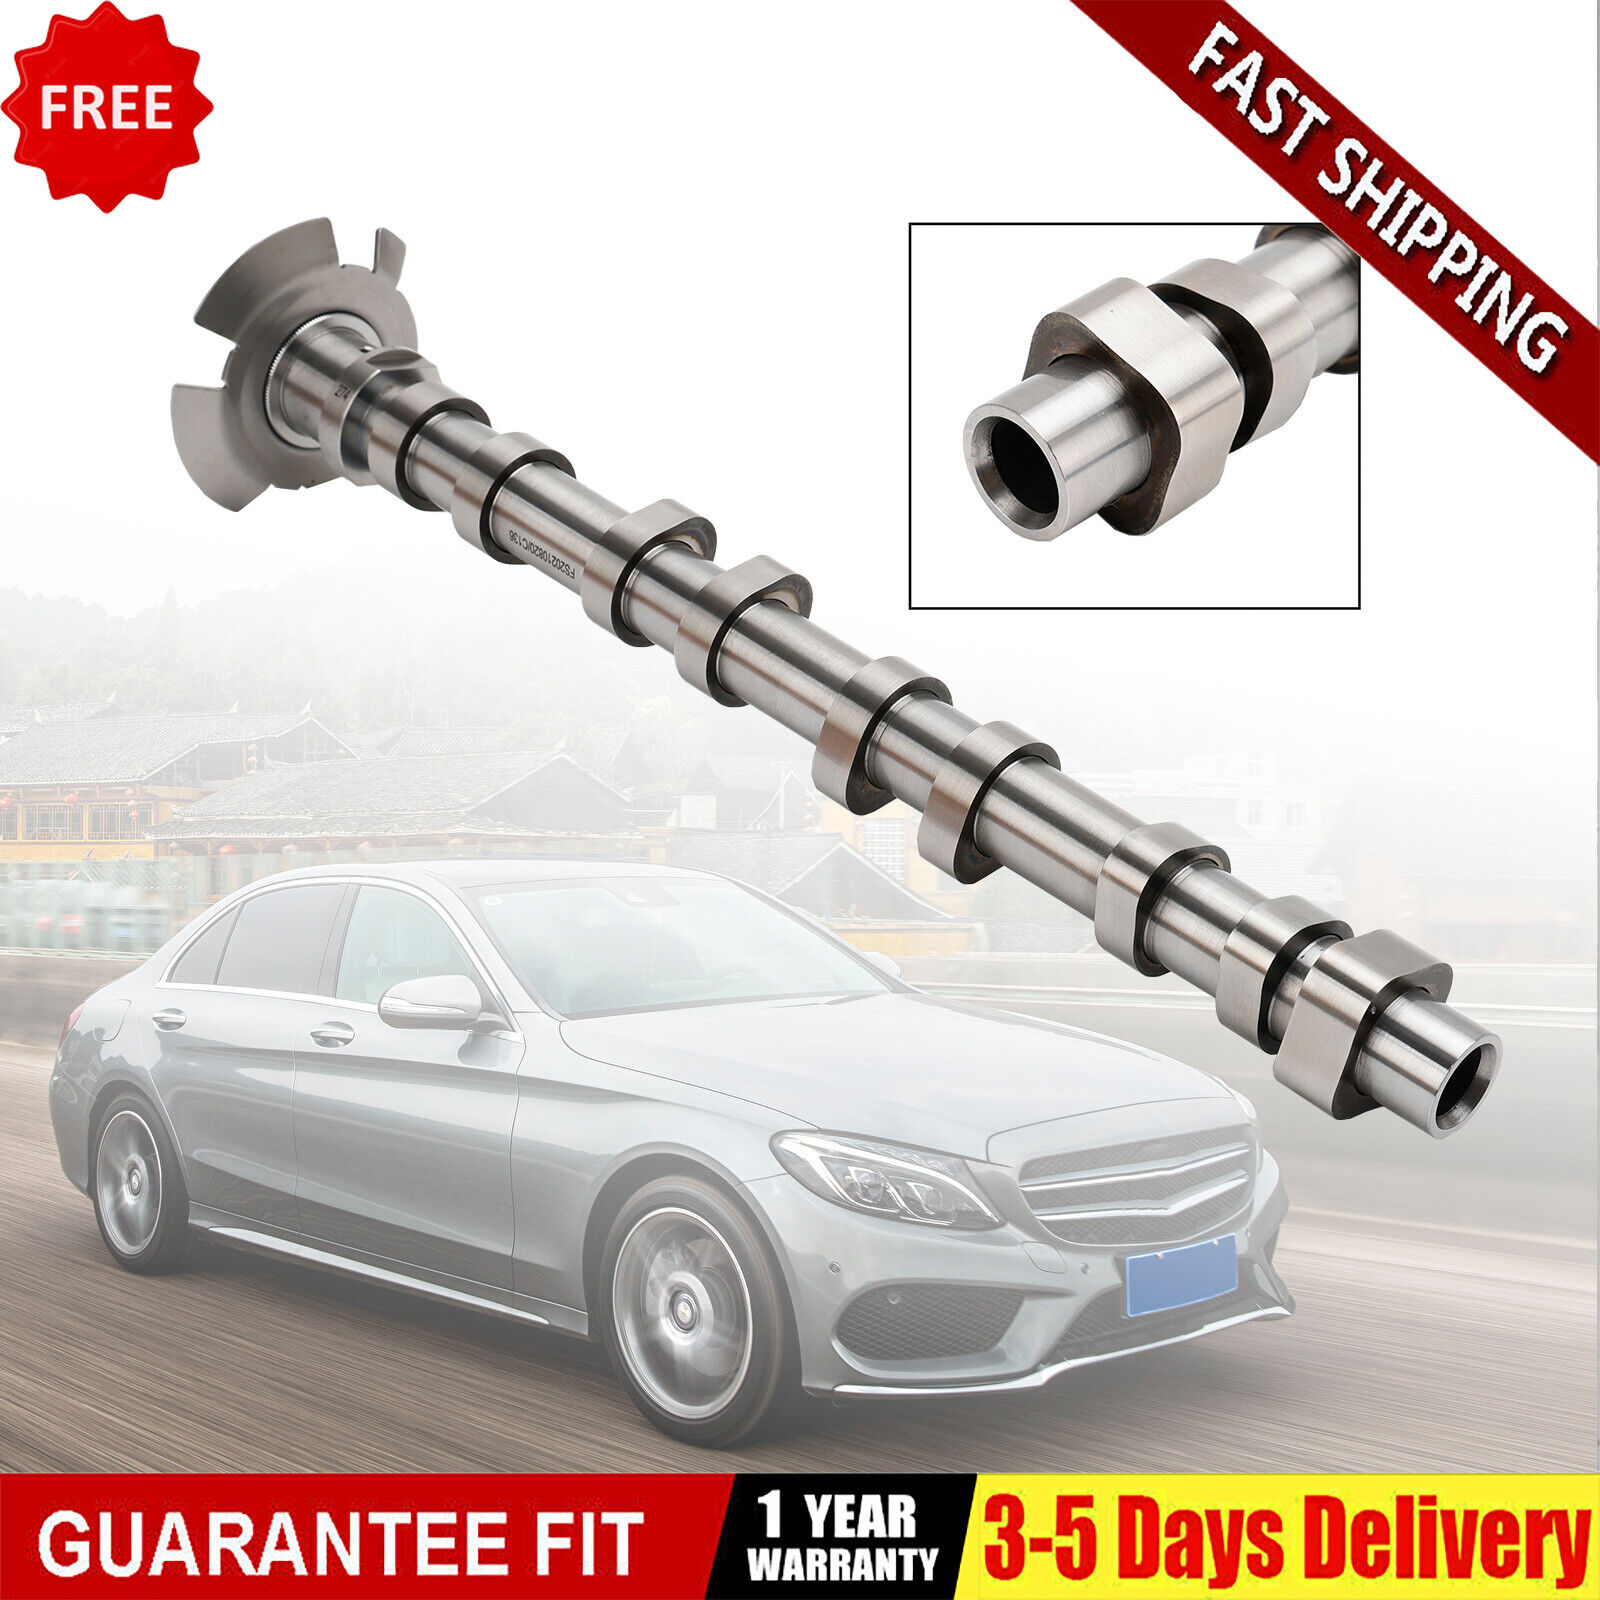 1× Intake Inlet Camshaft For Mercedes-Benz W205 W212 X253 C200 E250 M274 1.6 2.0